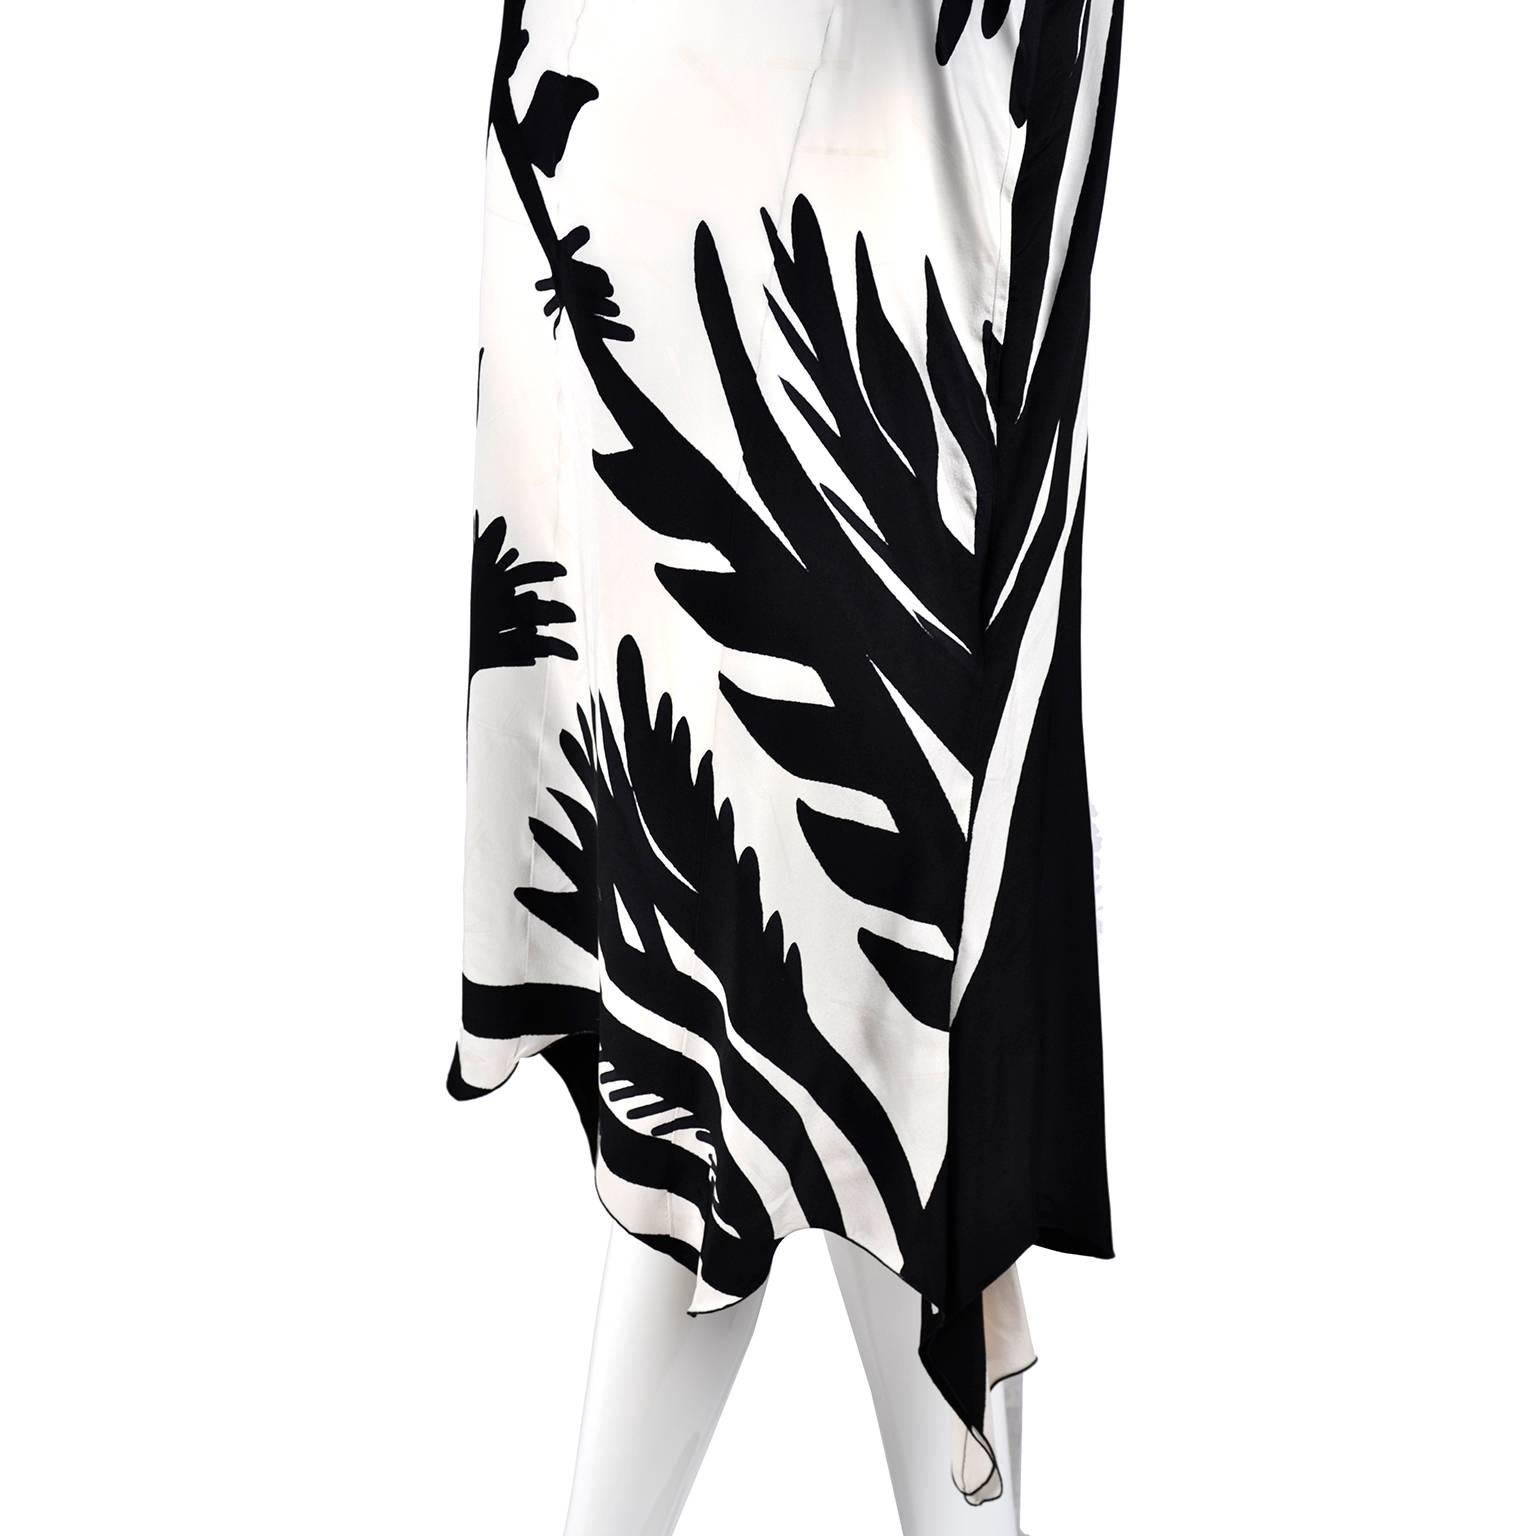 Vintage Caftan Dress in Black and White High Contrast Abstract Print (Schwarz)